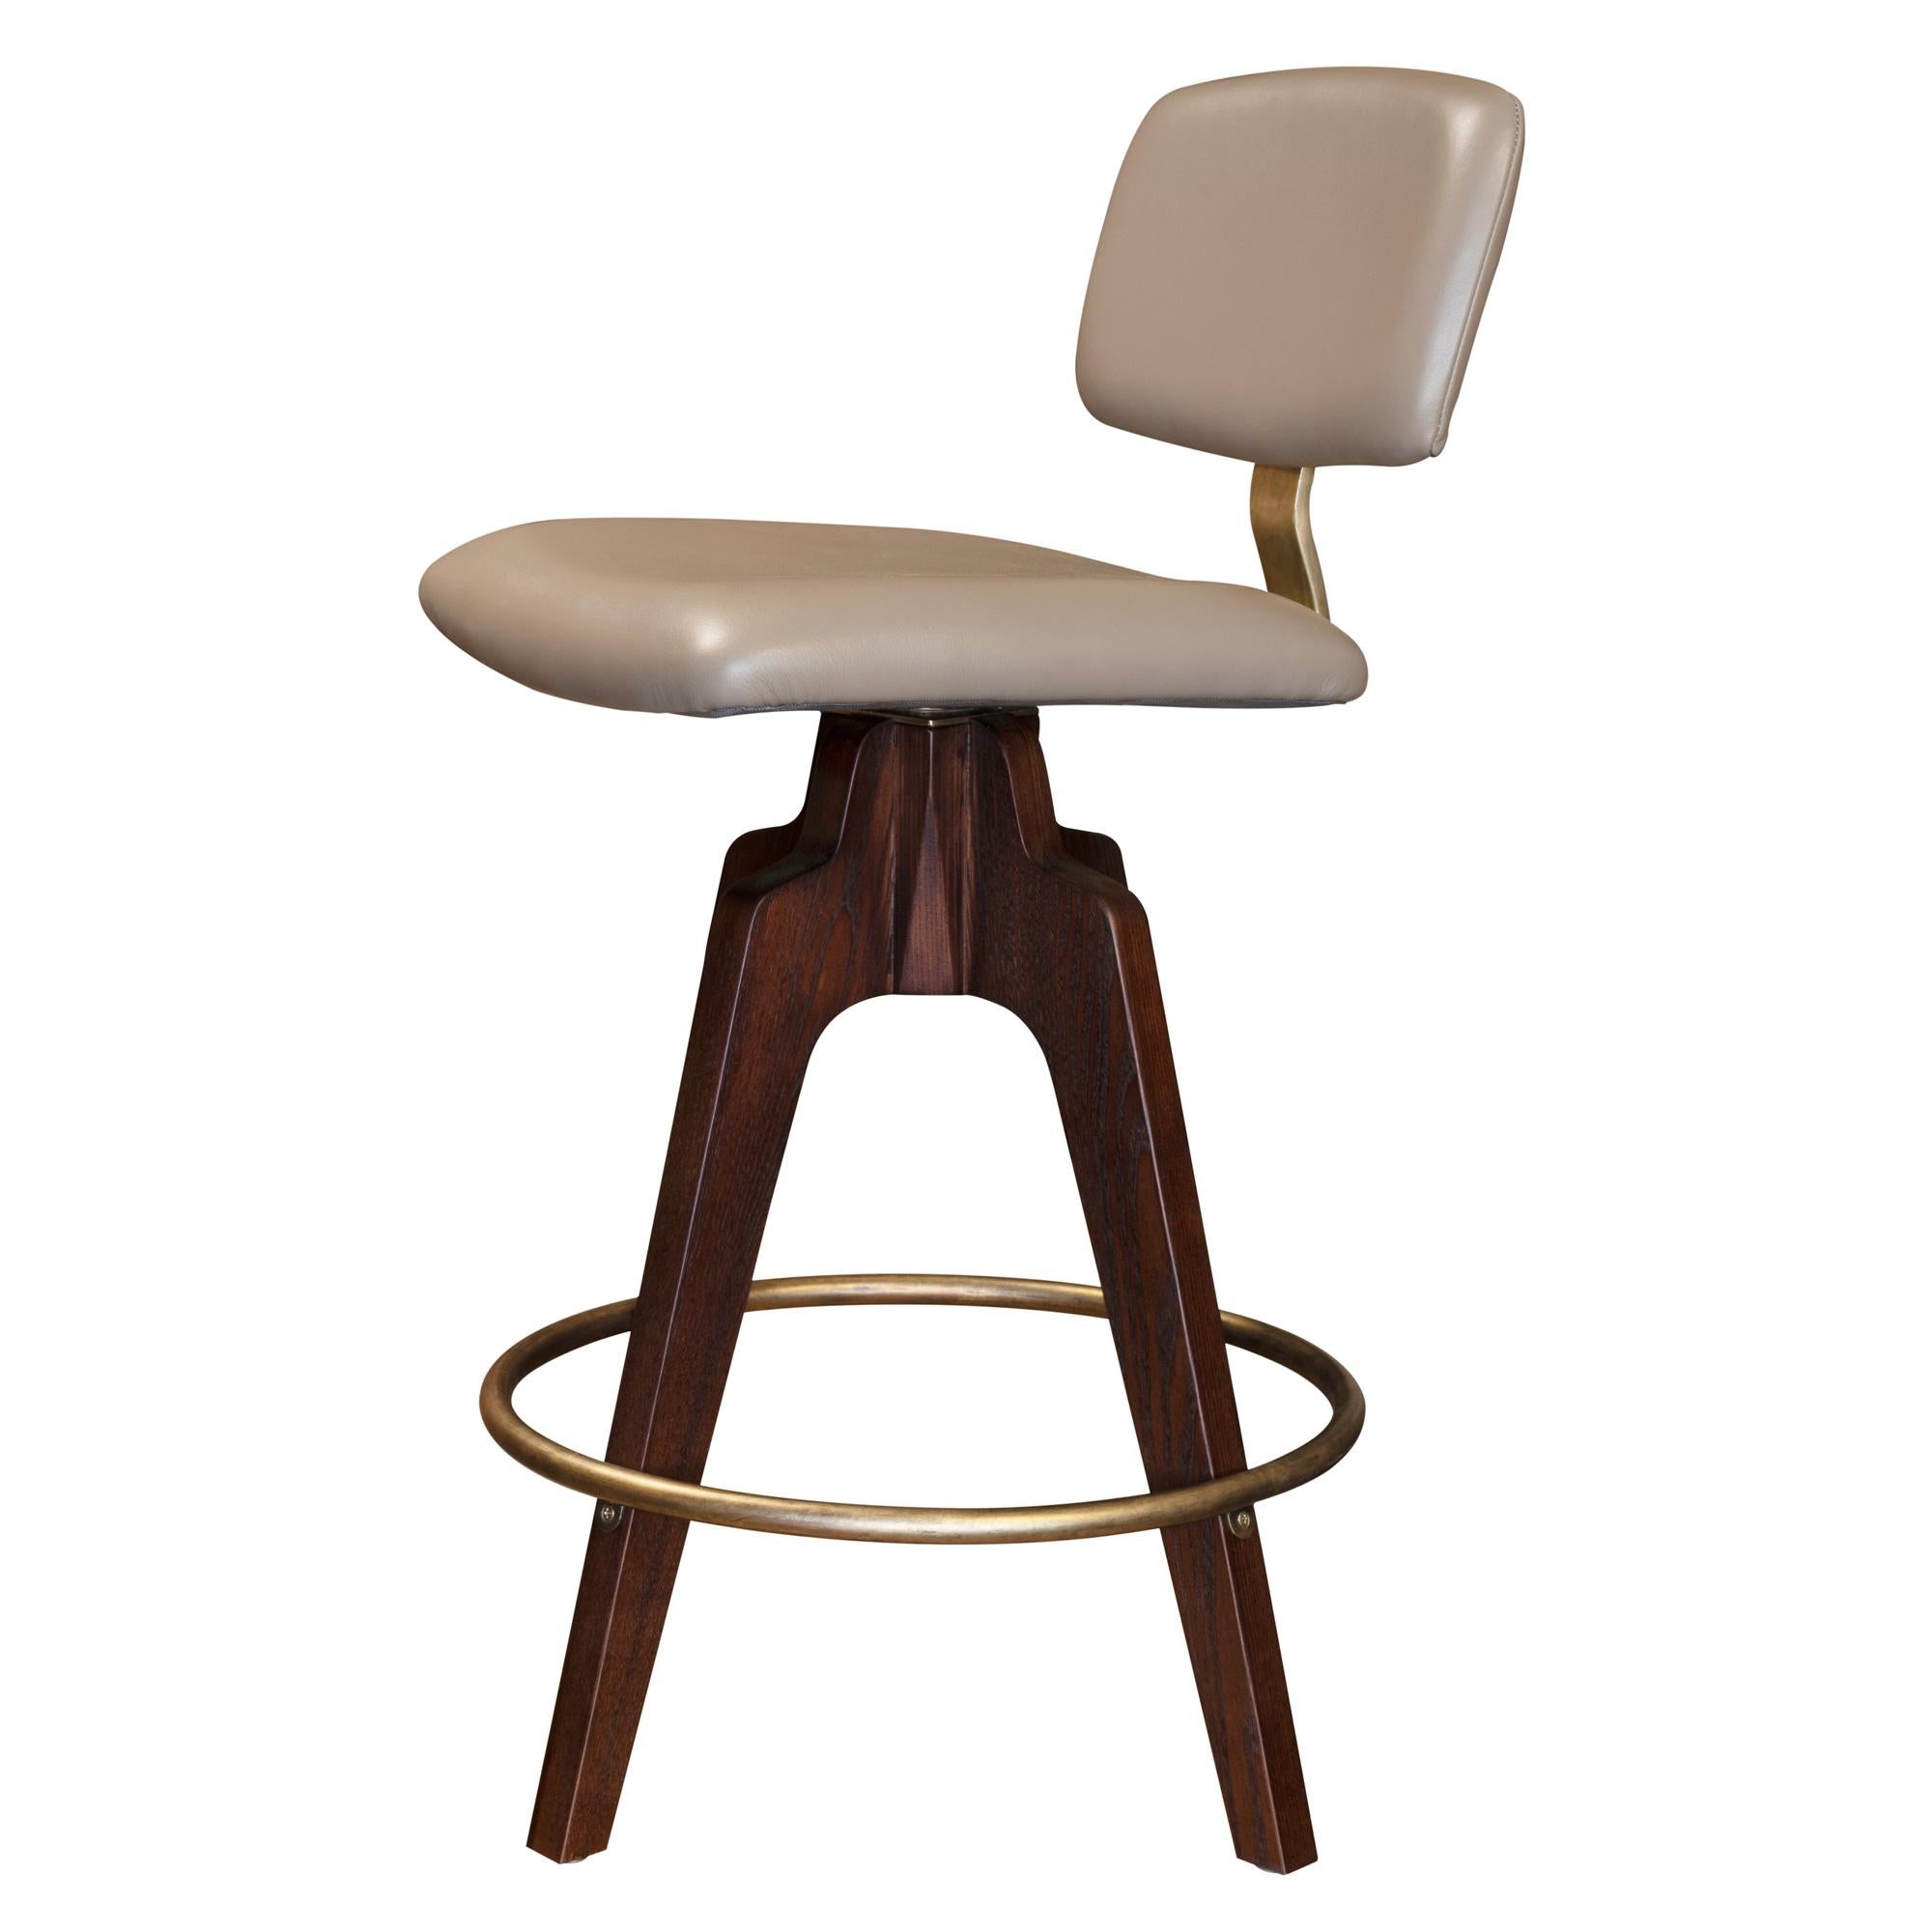 Contemporary Reeves Swivel Bar Stool W/ Ash legs stained Walnut, Leather & Brass Finish.  For Sale